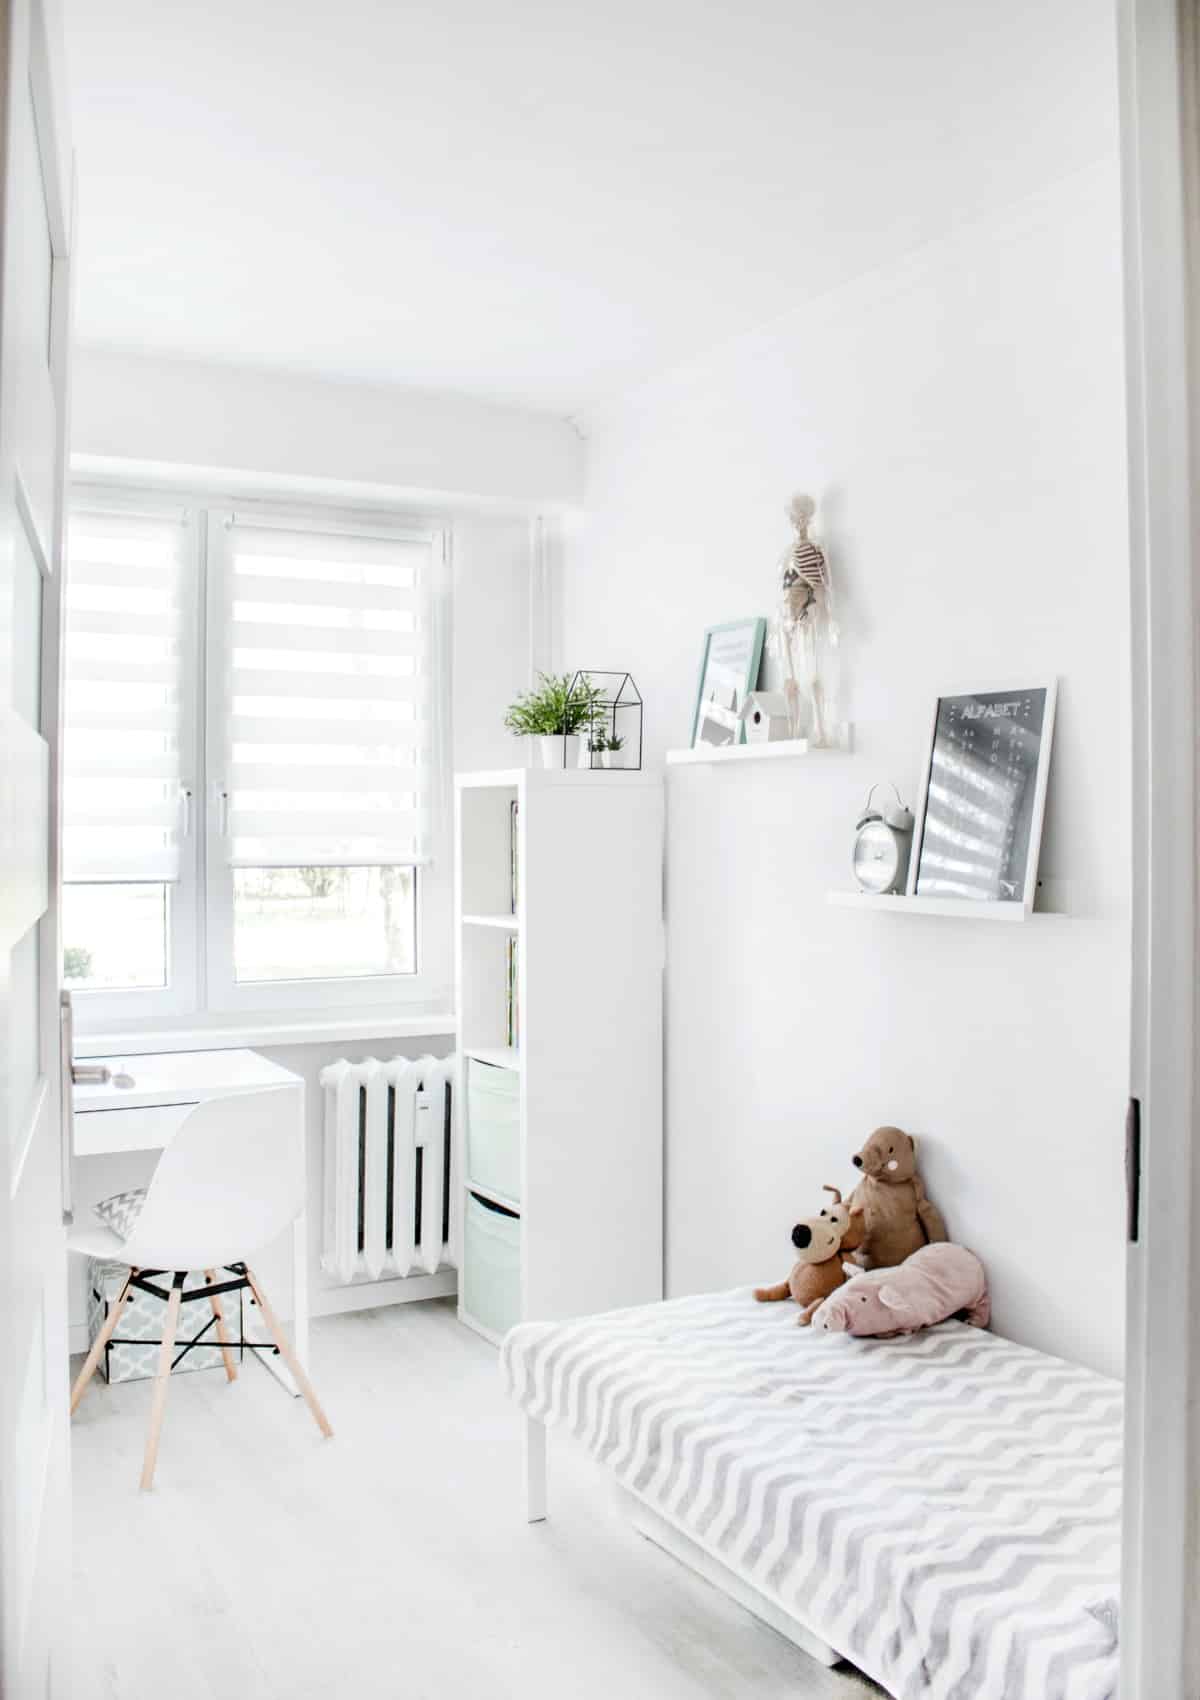 Plush Toys on Top of White and Grey Mattress Inside Bedroom with blinds on window